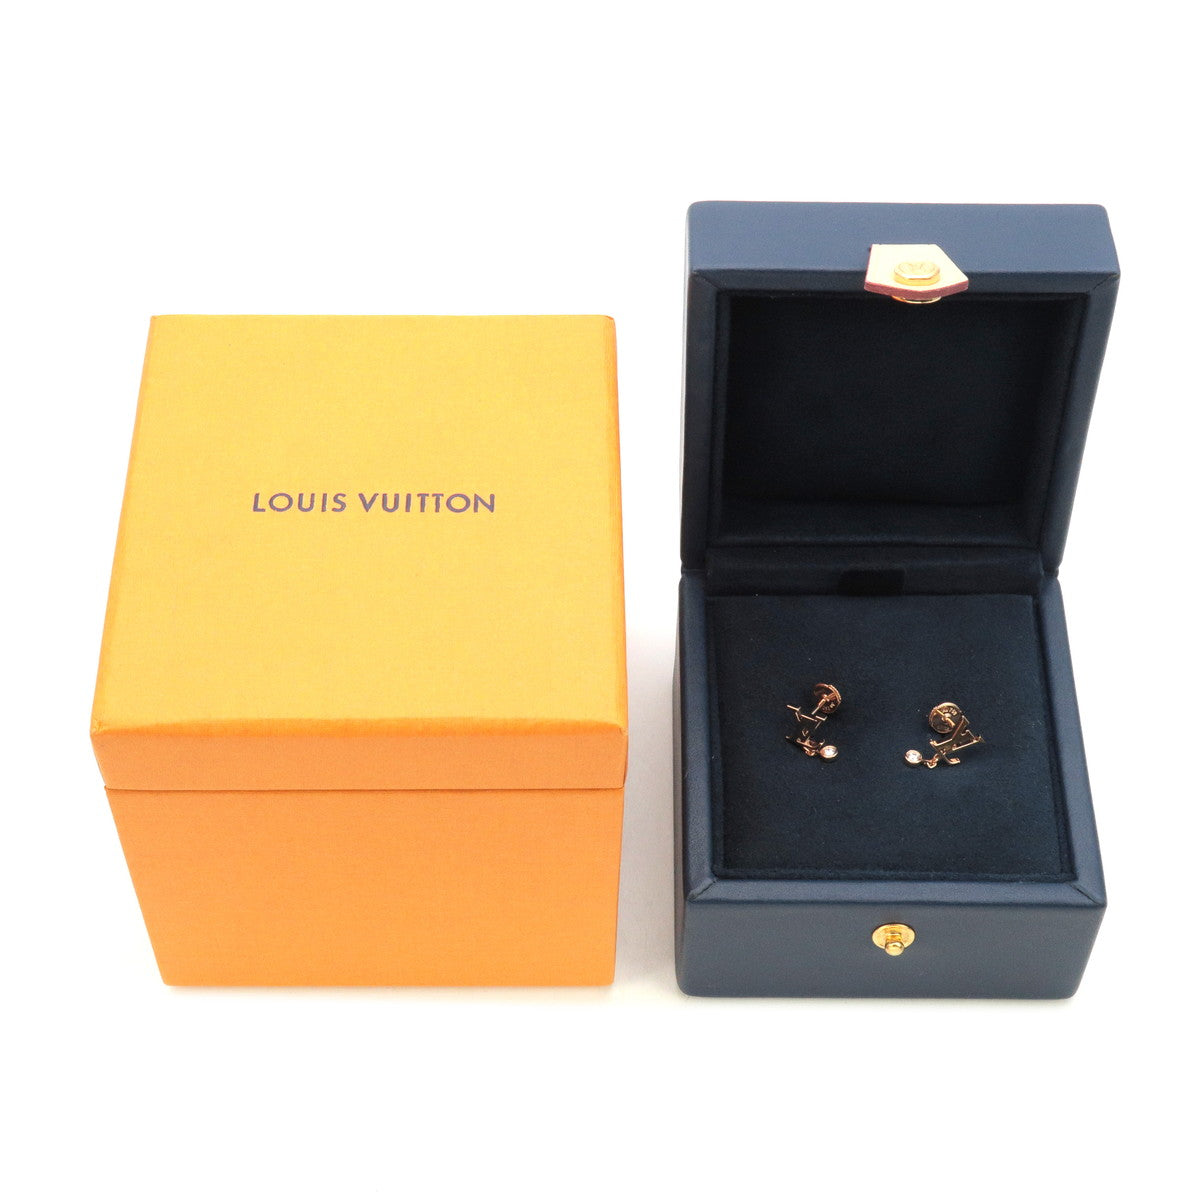 Louis Vuitton Idylle Blossom Ear Stud, Yellow Gold And Diamonds